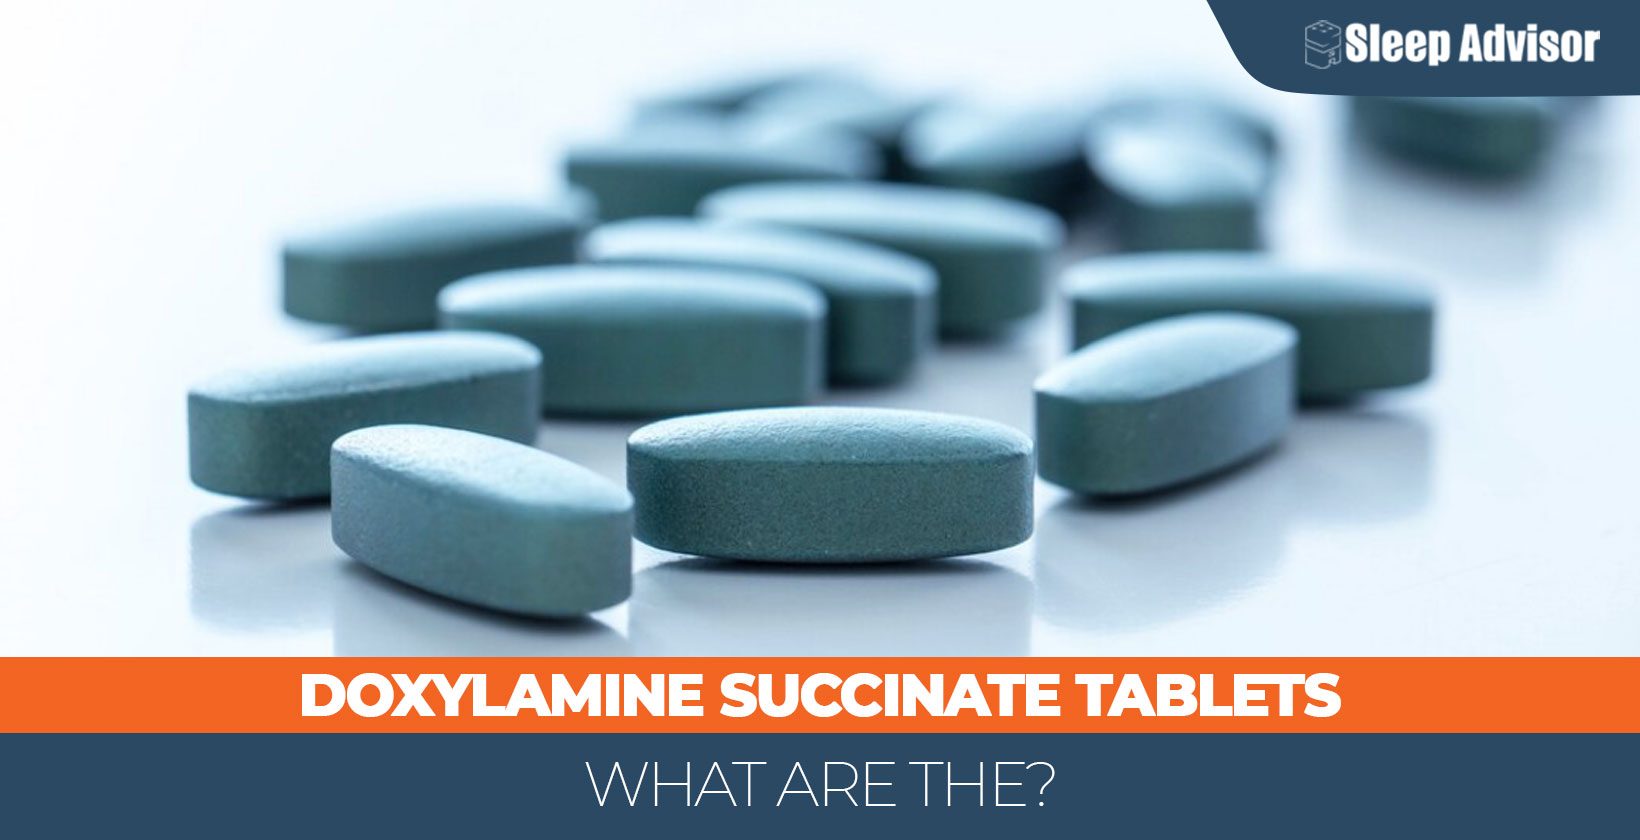 What Are Doxylamine Succinate Tablets?